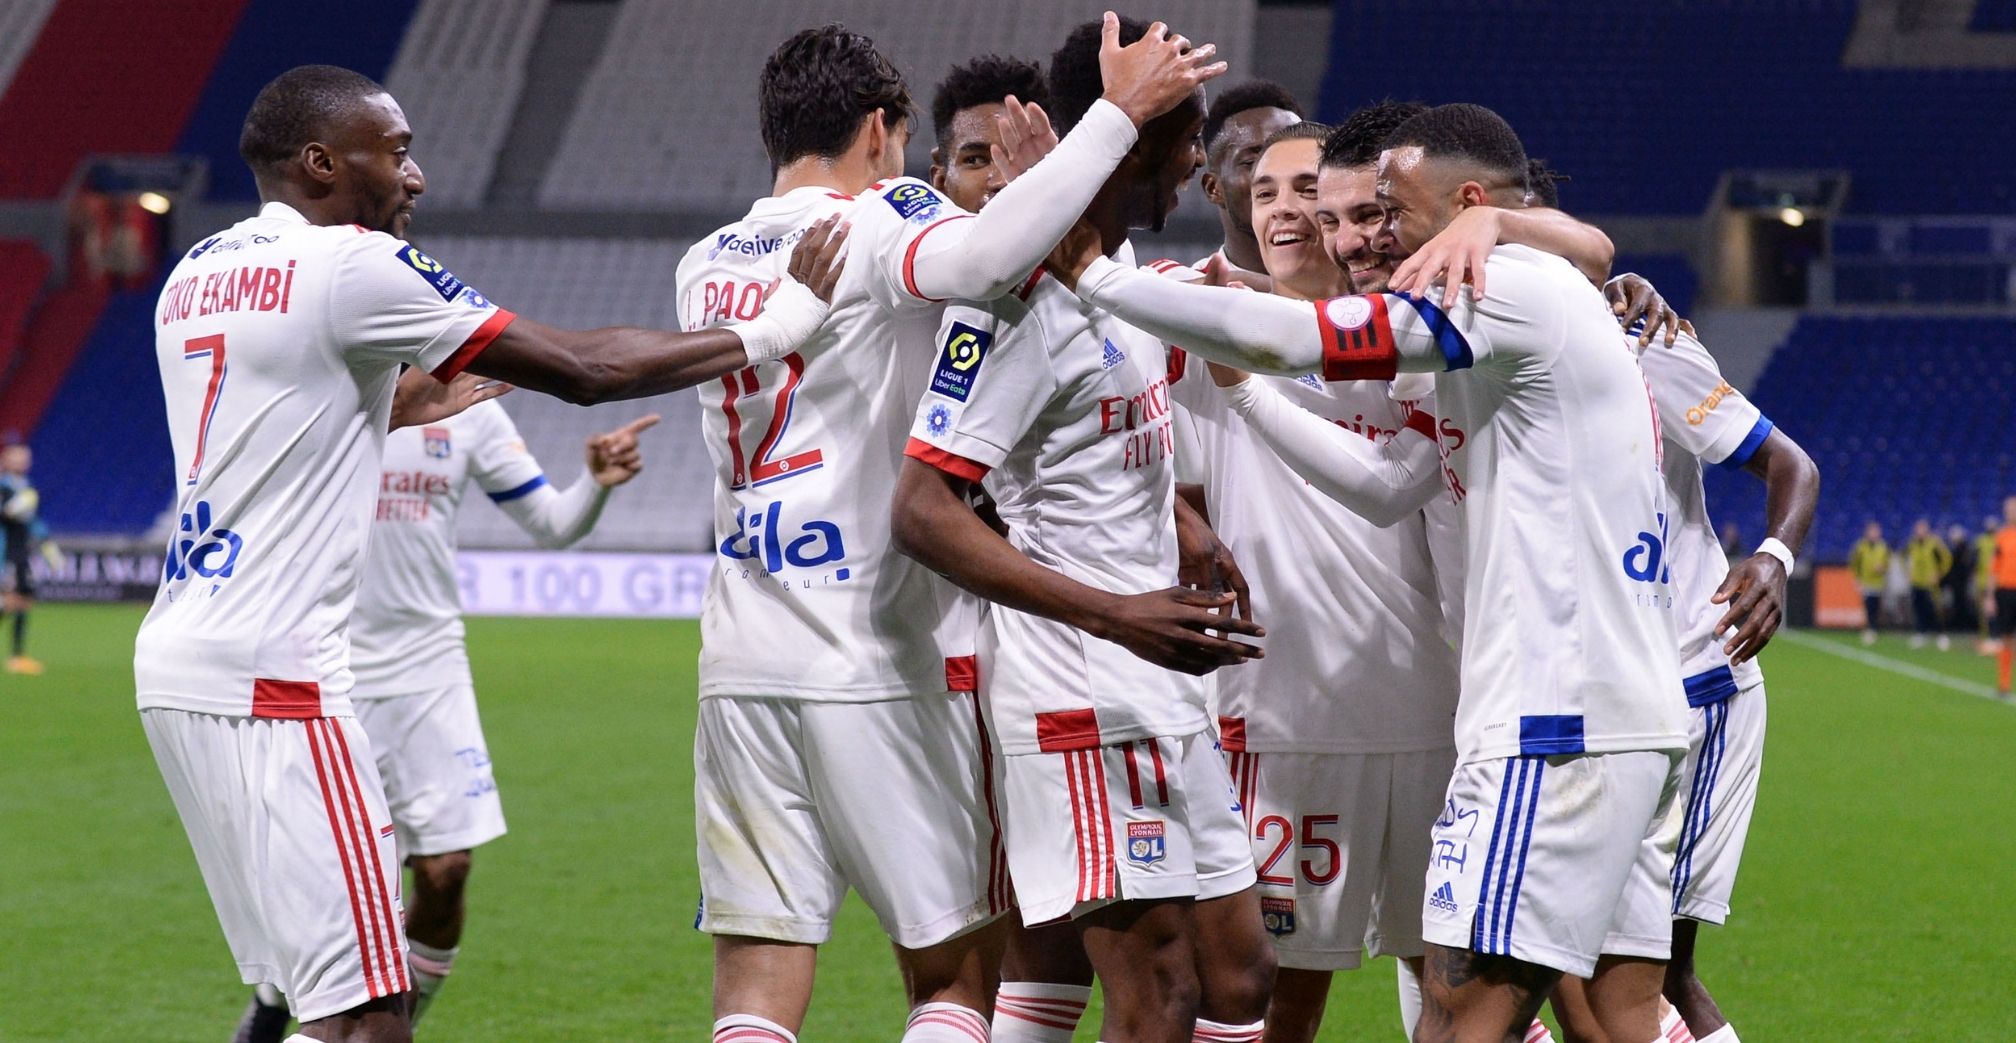 Lyon-Strasbourg preview: More expected from attacking trio